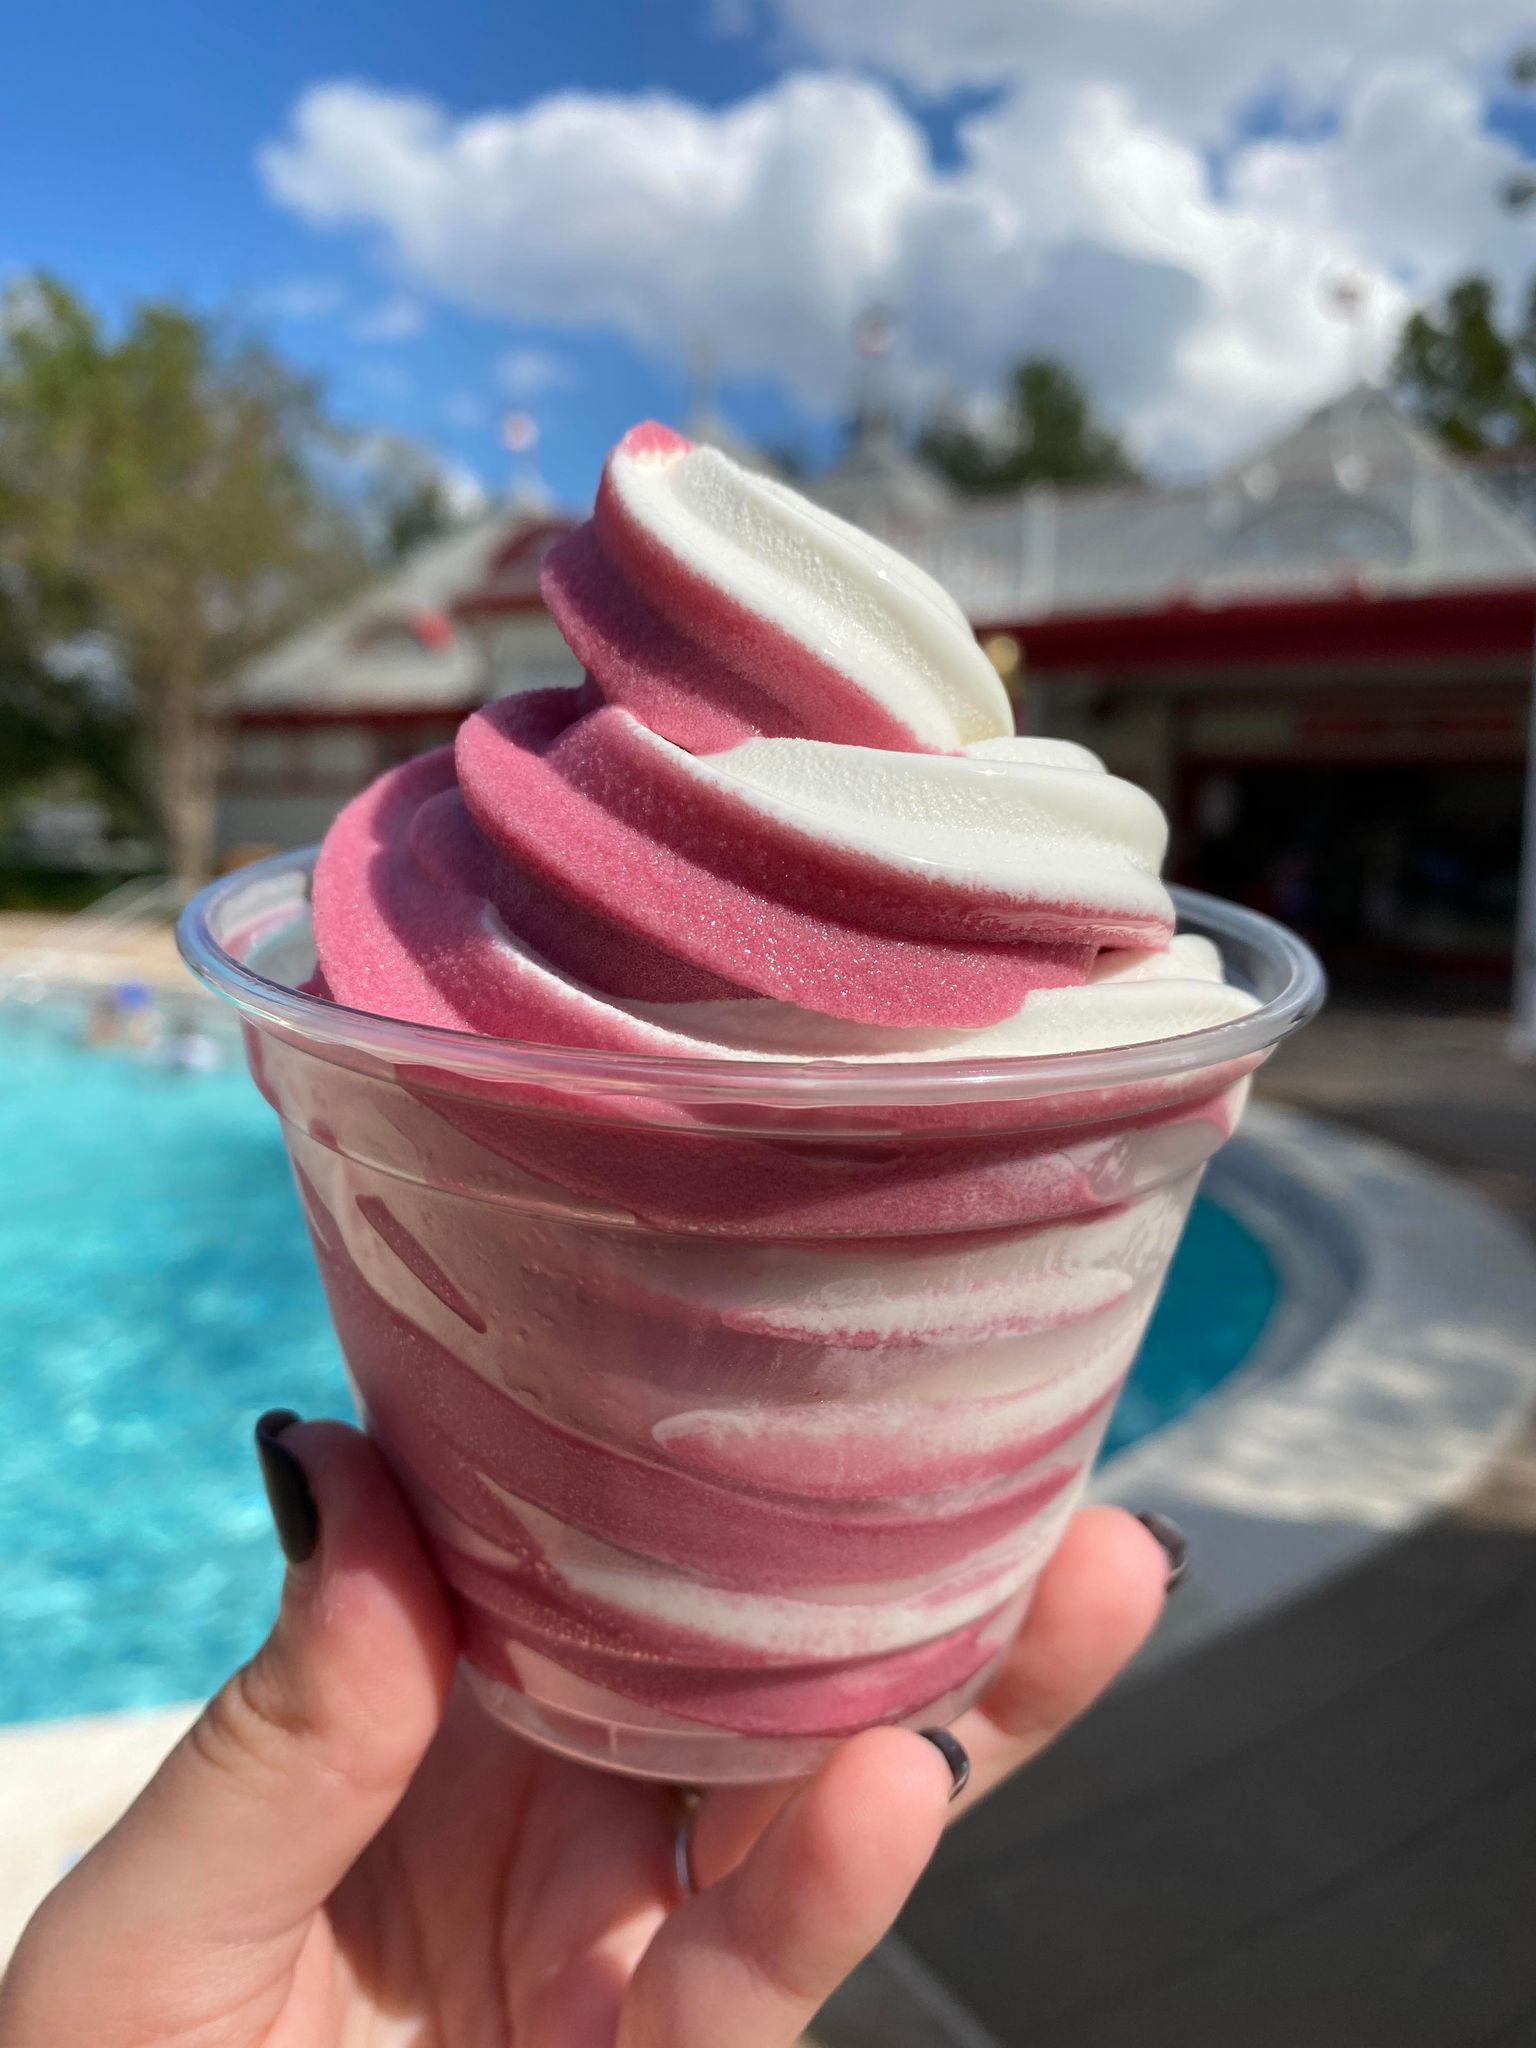 Cherry Dole Whip next to the pool at Saratoga Springs